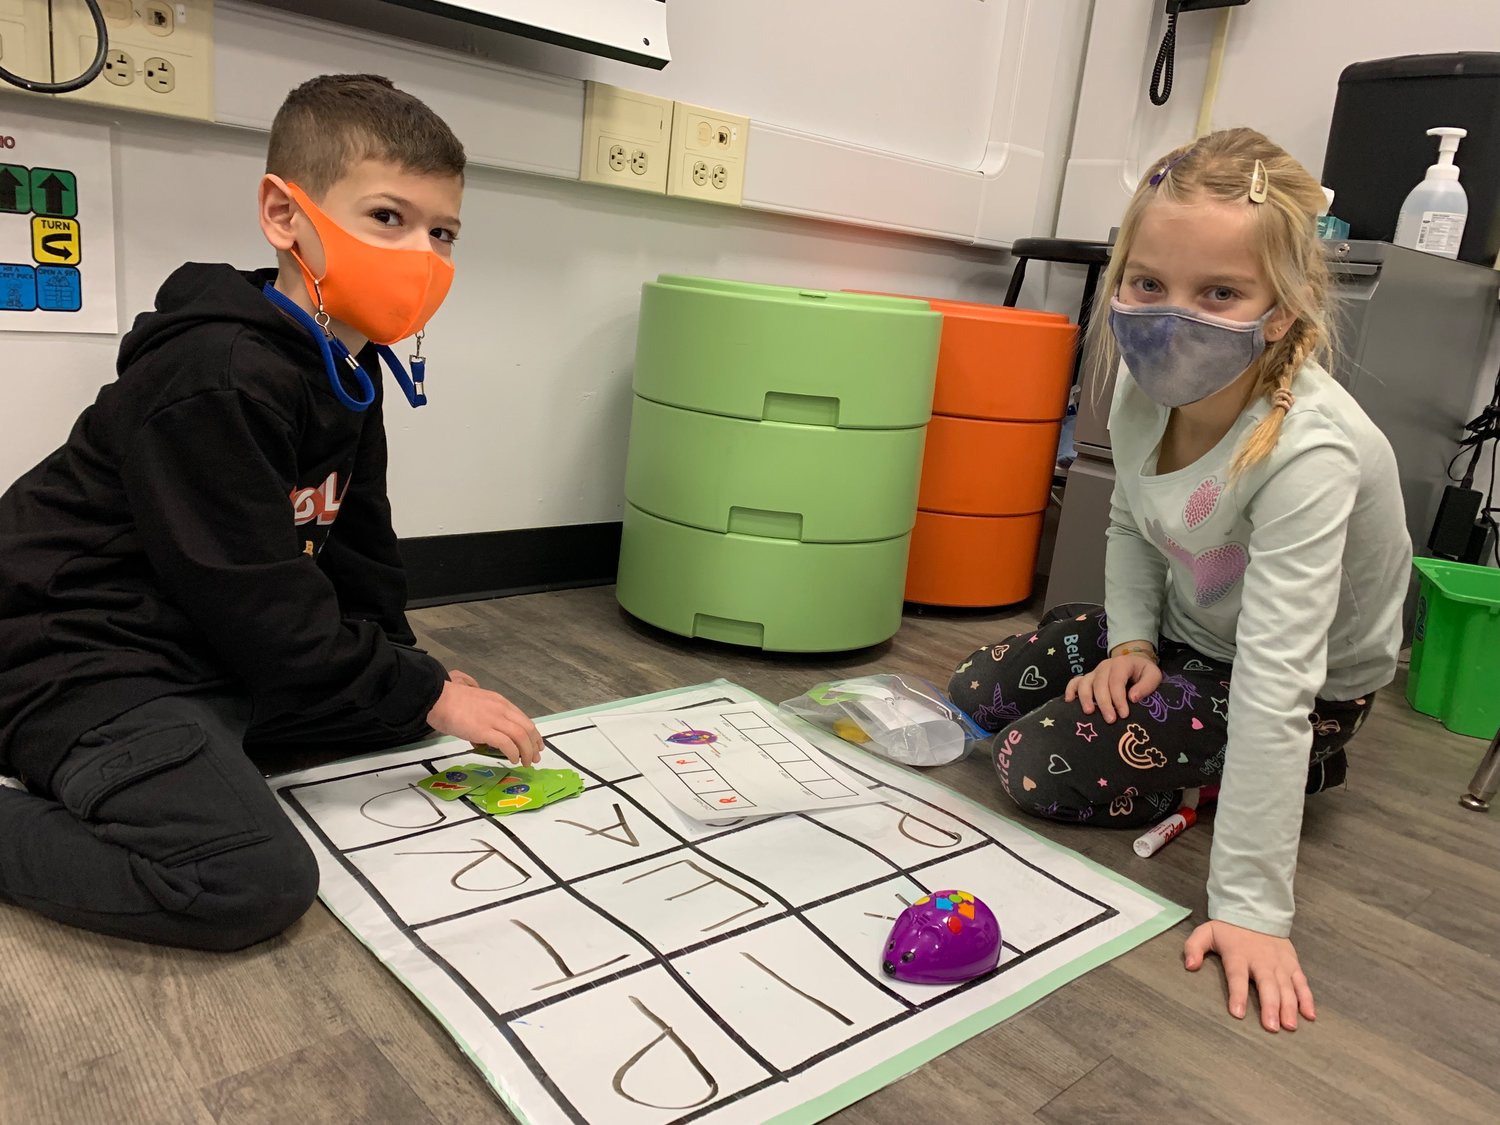 Third graders at Lakeside Levy School in Merrick Union Free School District imagined what it would be like to be trapped inside a snow globe.